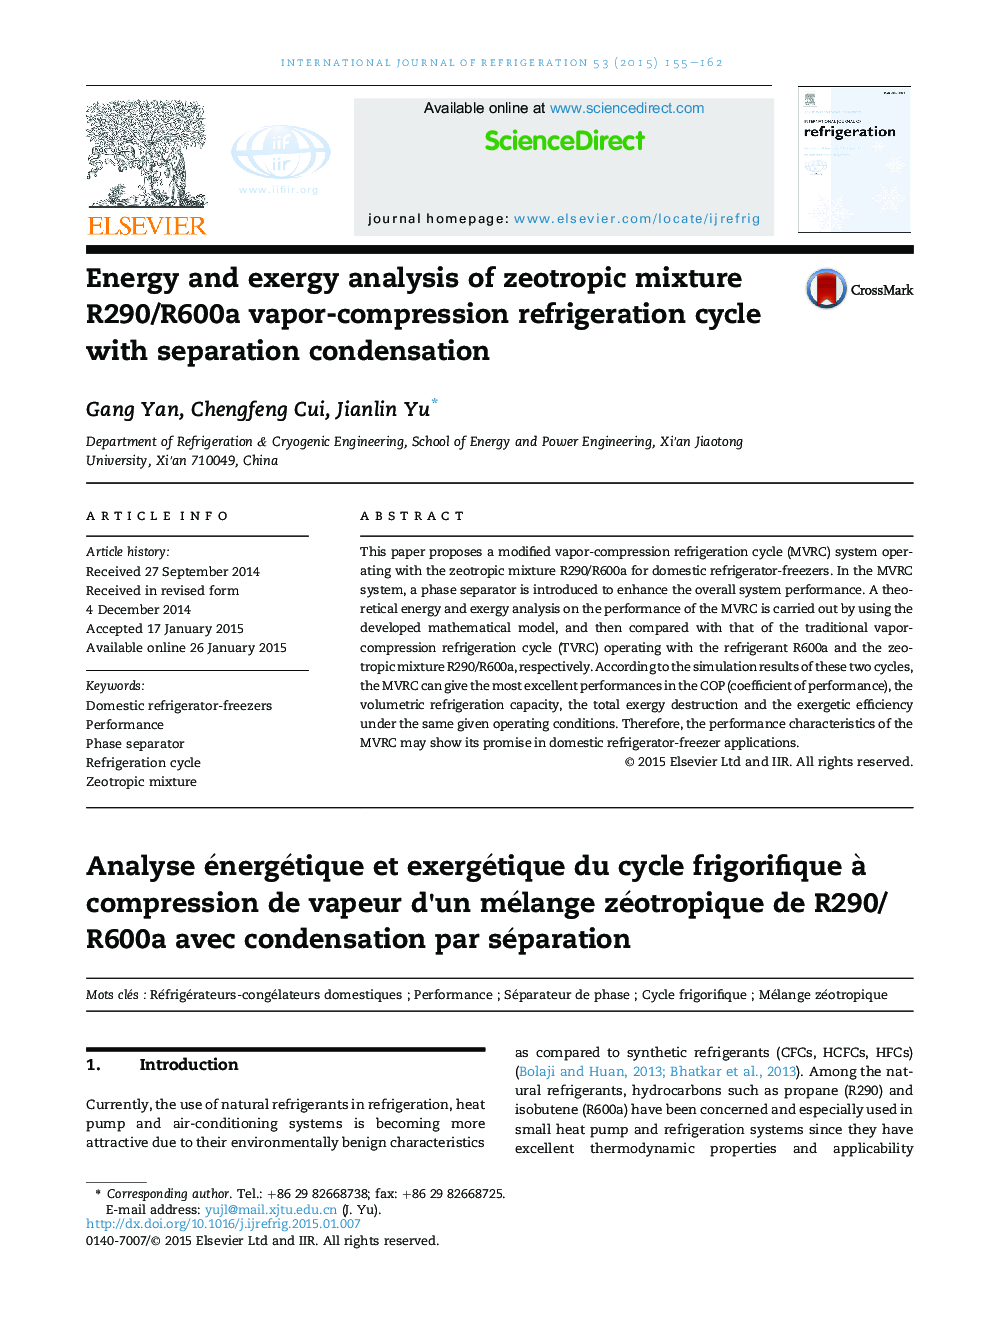 Energy and exergy analysis of zeotropic mixture R290/R600a vapor-compression refrigeration cycle with separation condensation